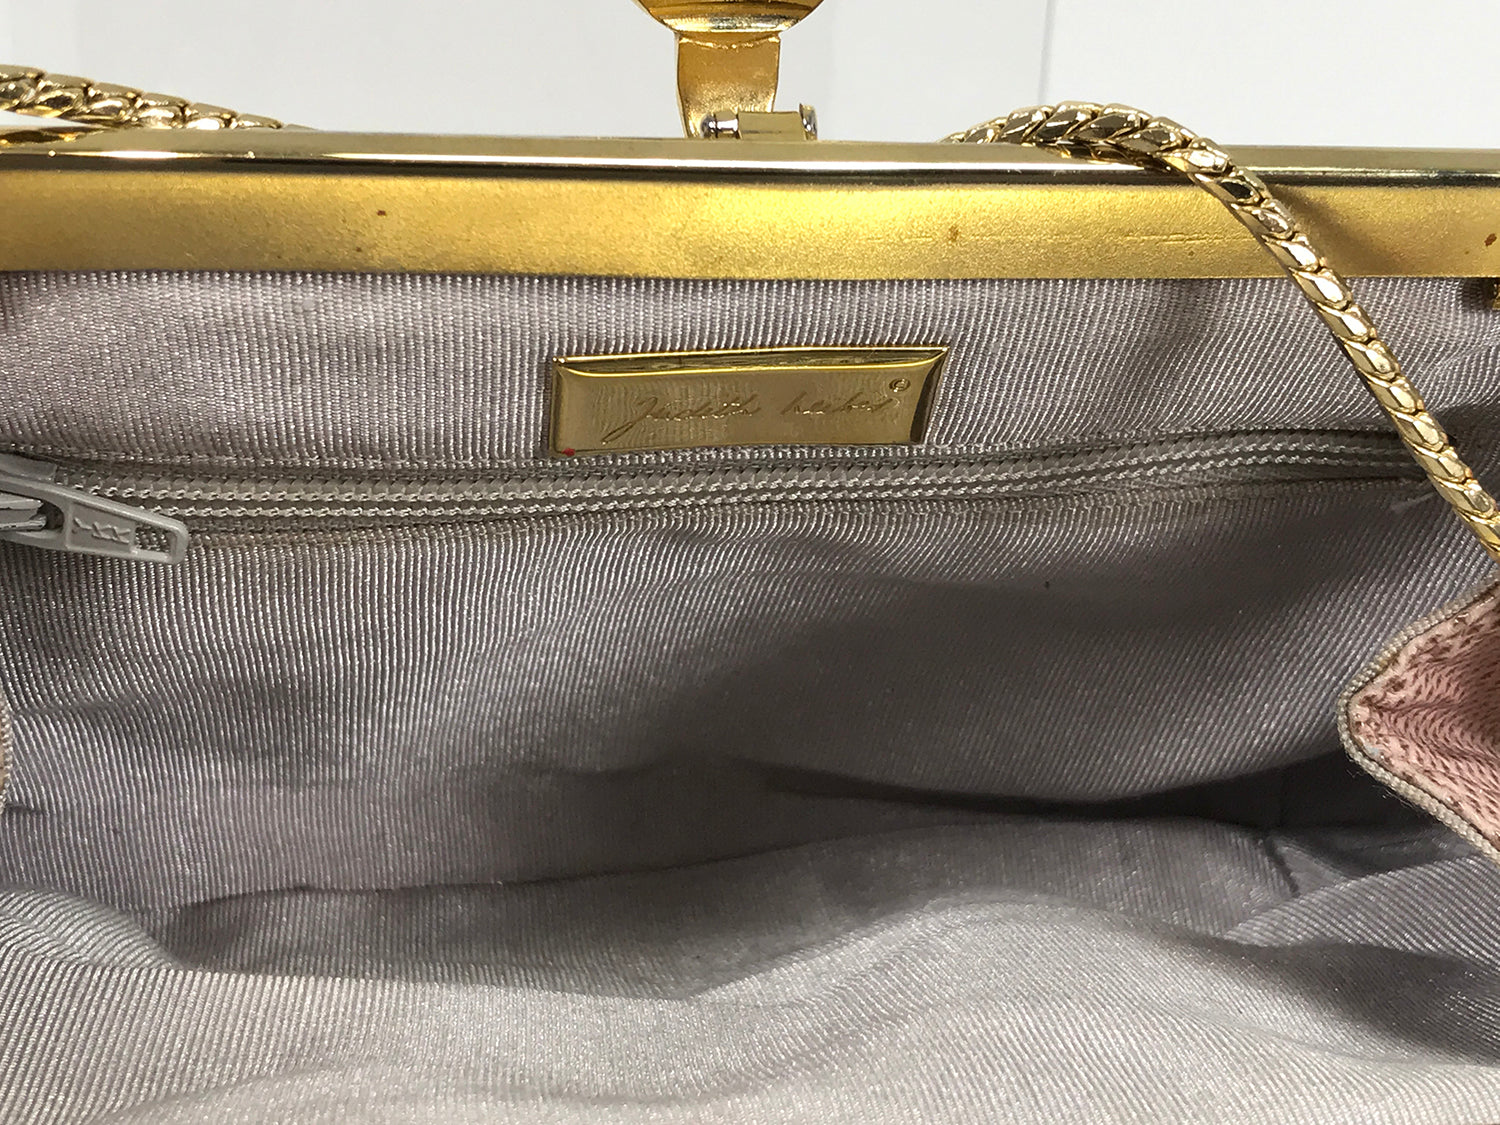 JUDITH LEIBER Nude to Brown Ombre Lizard Skin Purse Gold Straps – The Paper  Bag Princess Vintage